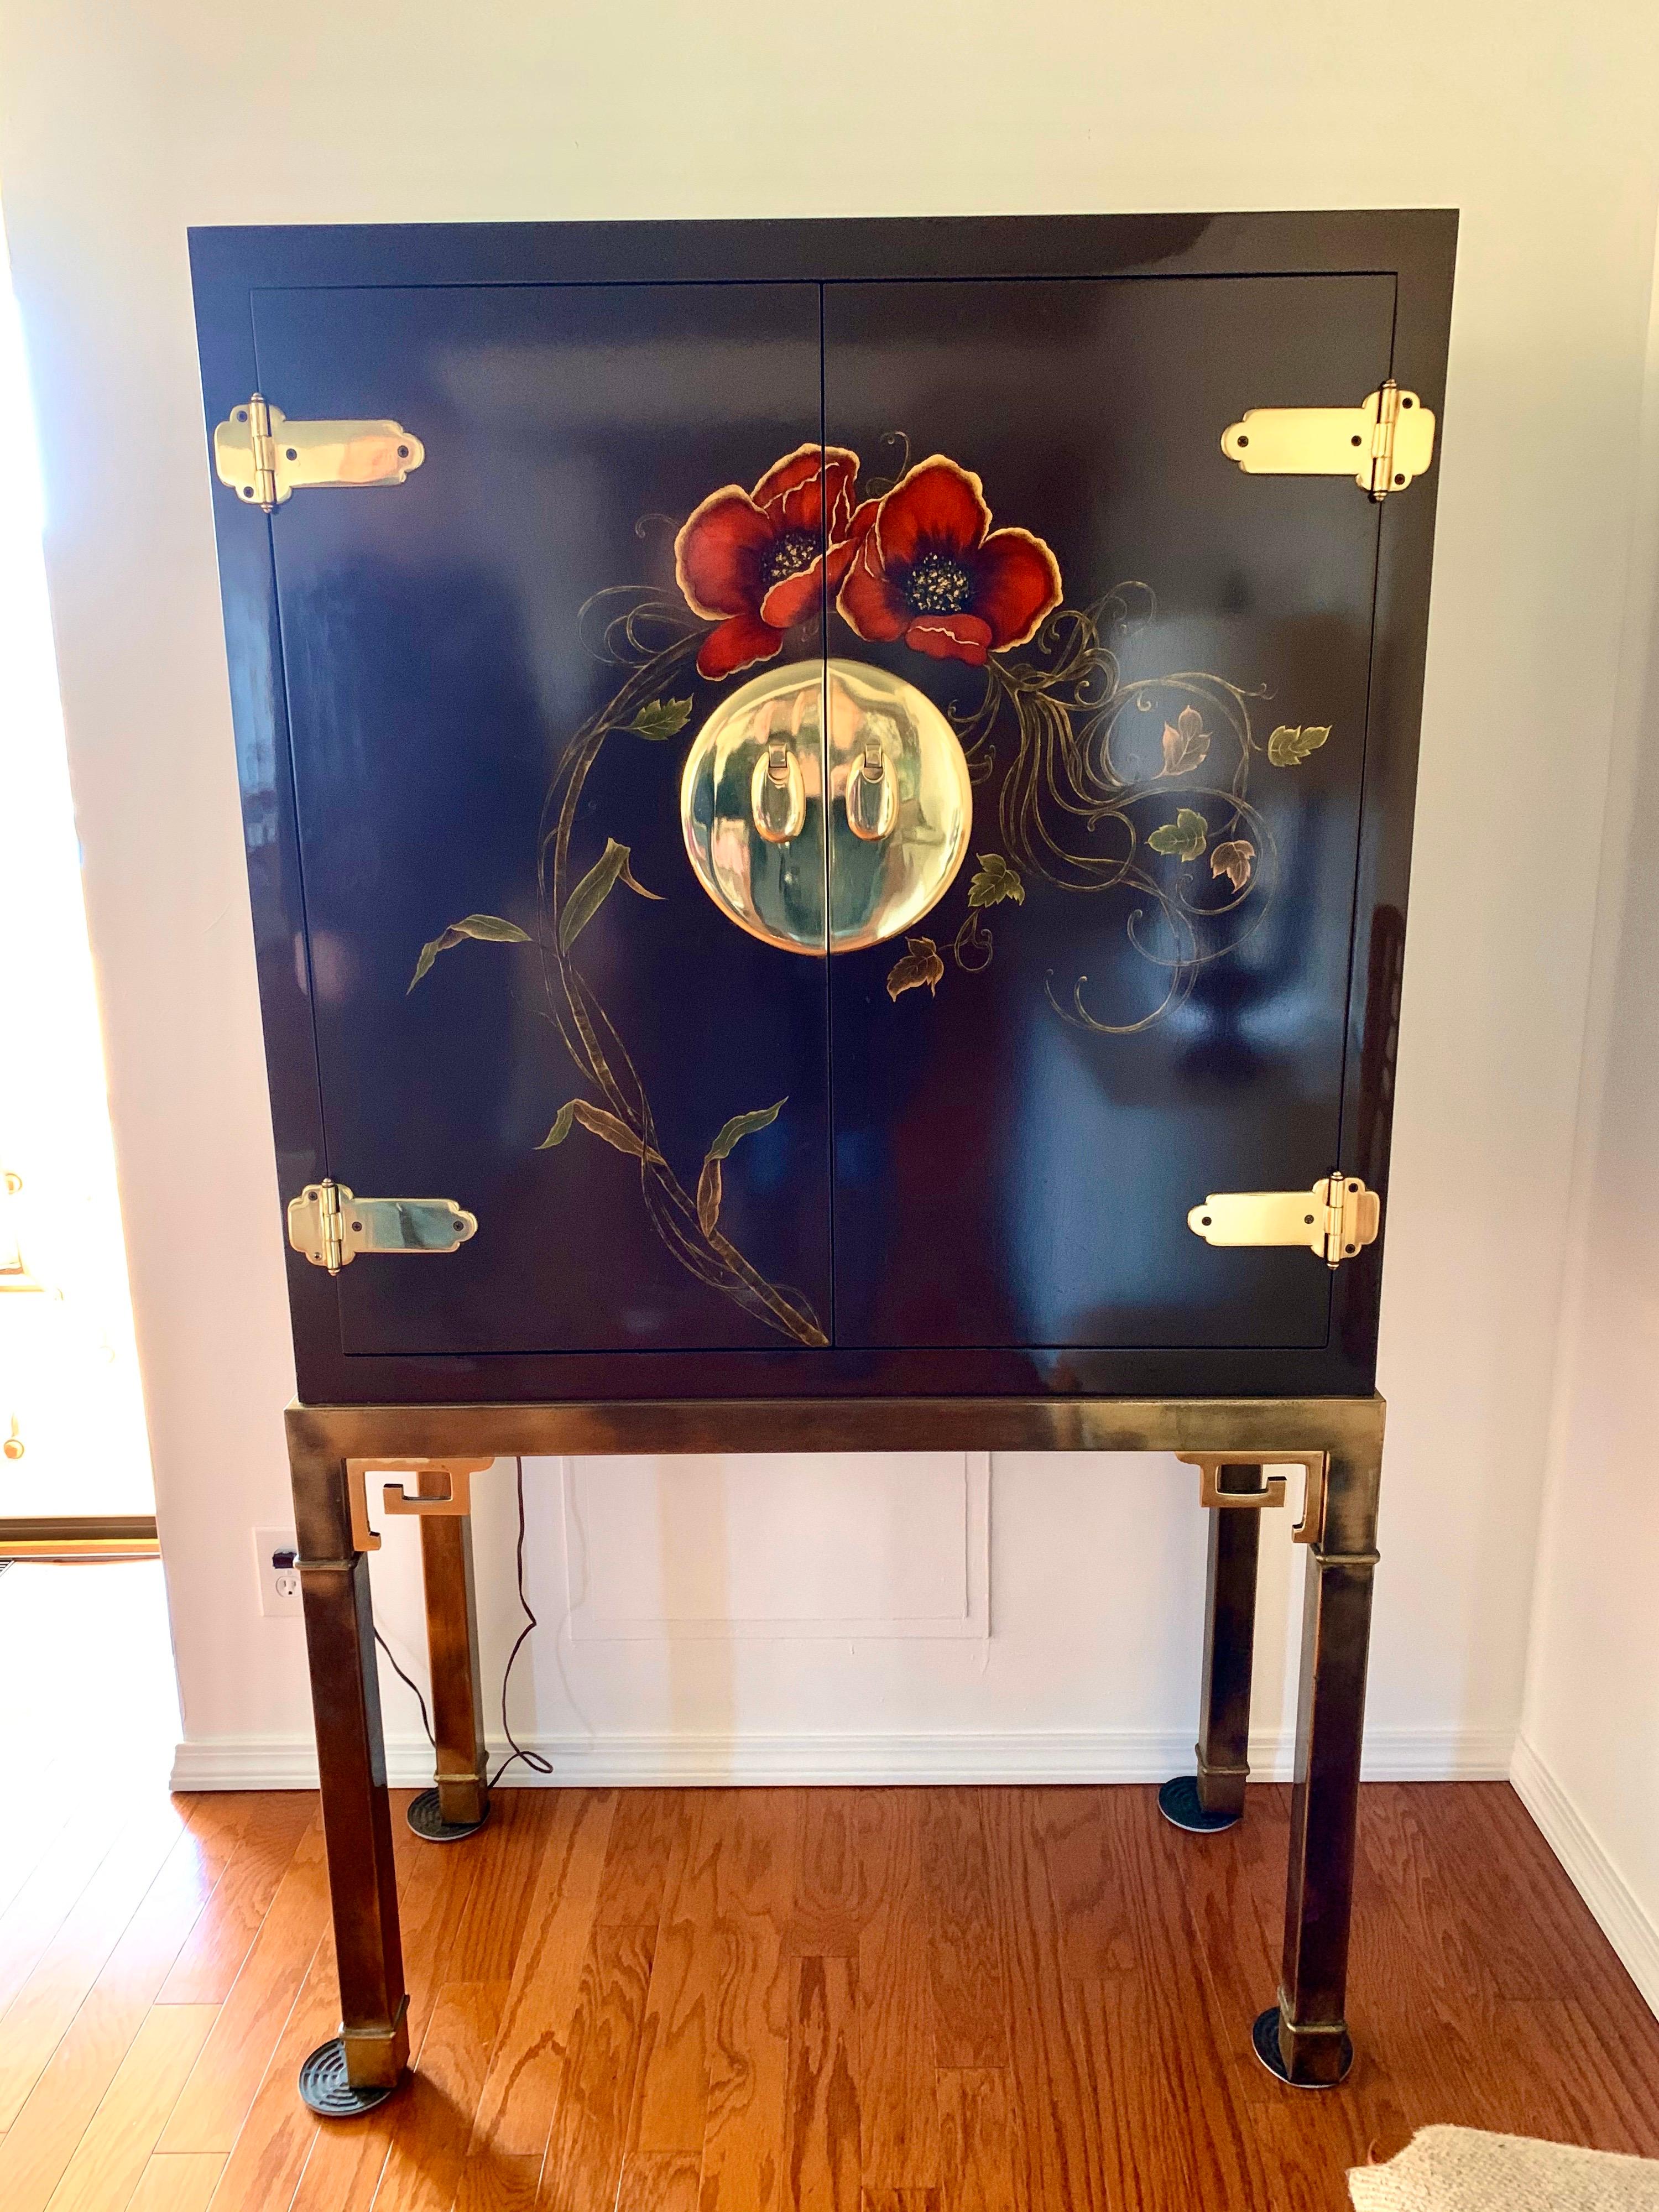 A coveted signed Mastercraft Classic, the mirrored bar cabinet which can also be used for entertainment system, etc. It has Greek key brass base and a lacquered top that looks like a work of art. What separates this piece from others is its